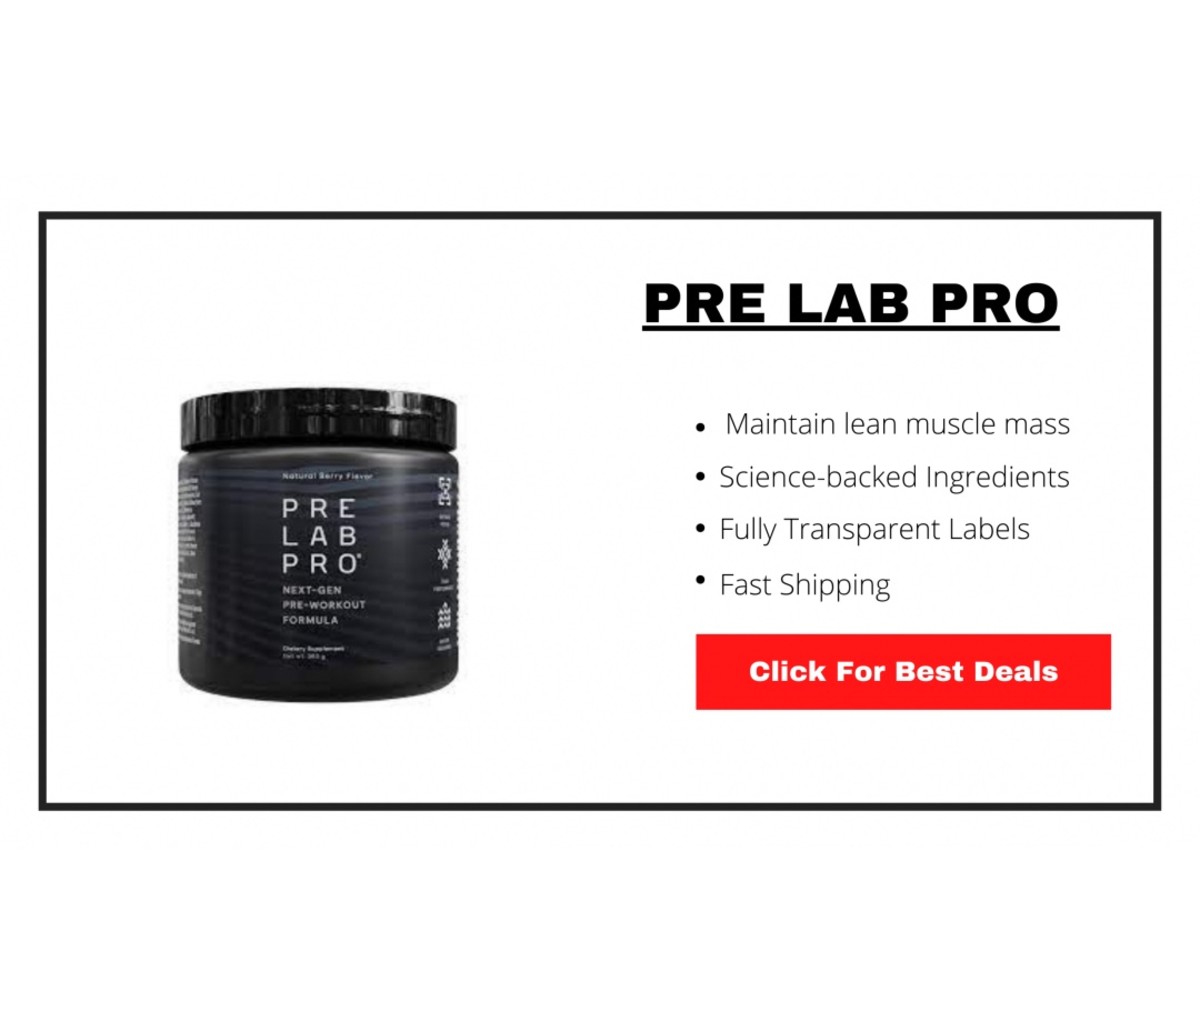 This guide will review five of the best pre-workout supplements that boost muscle growth, increase endurance, increase metabolism, and energize you.